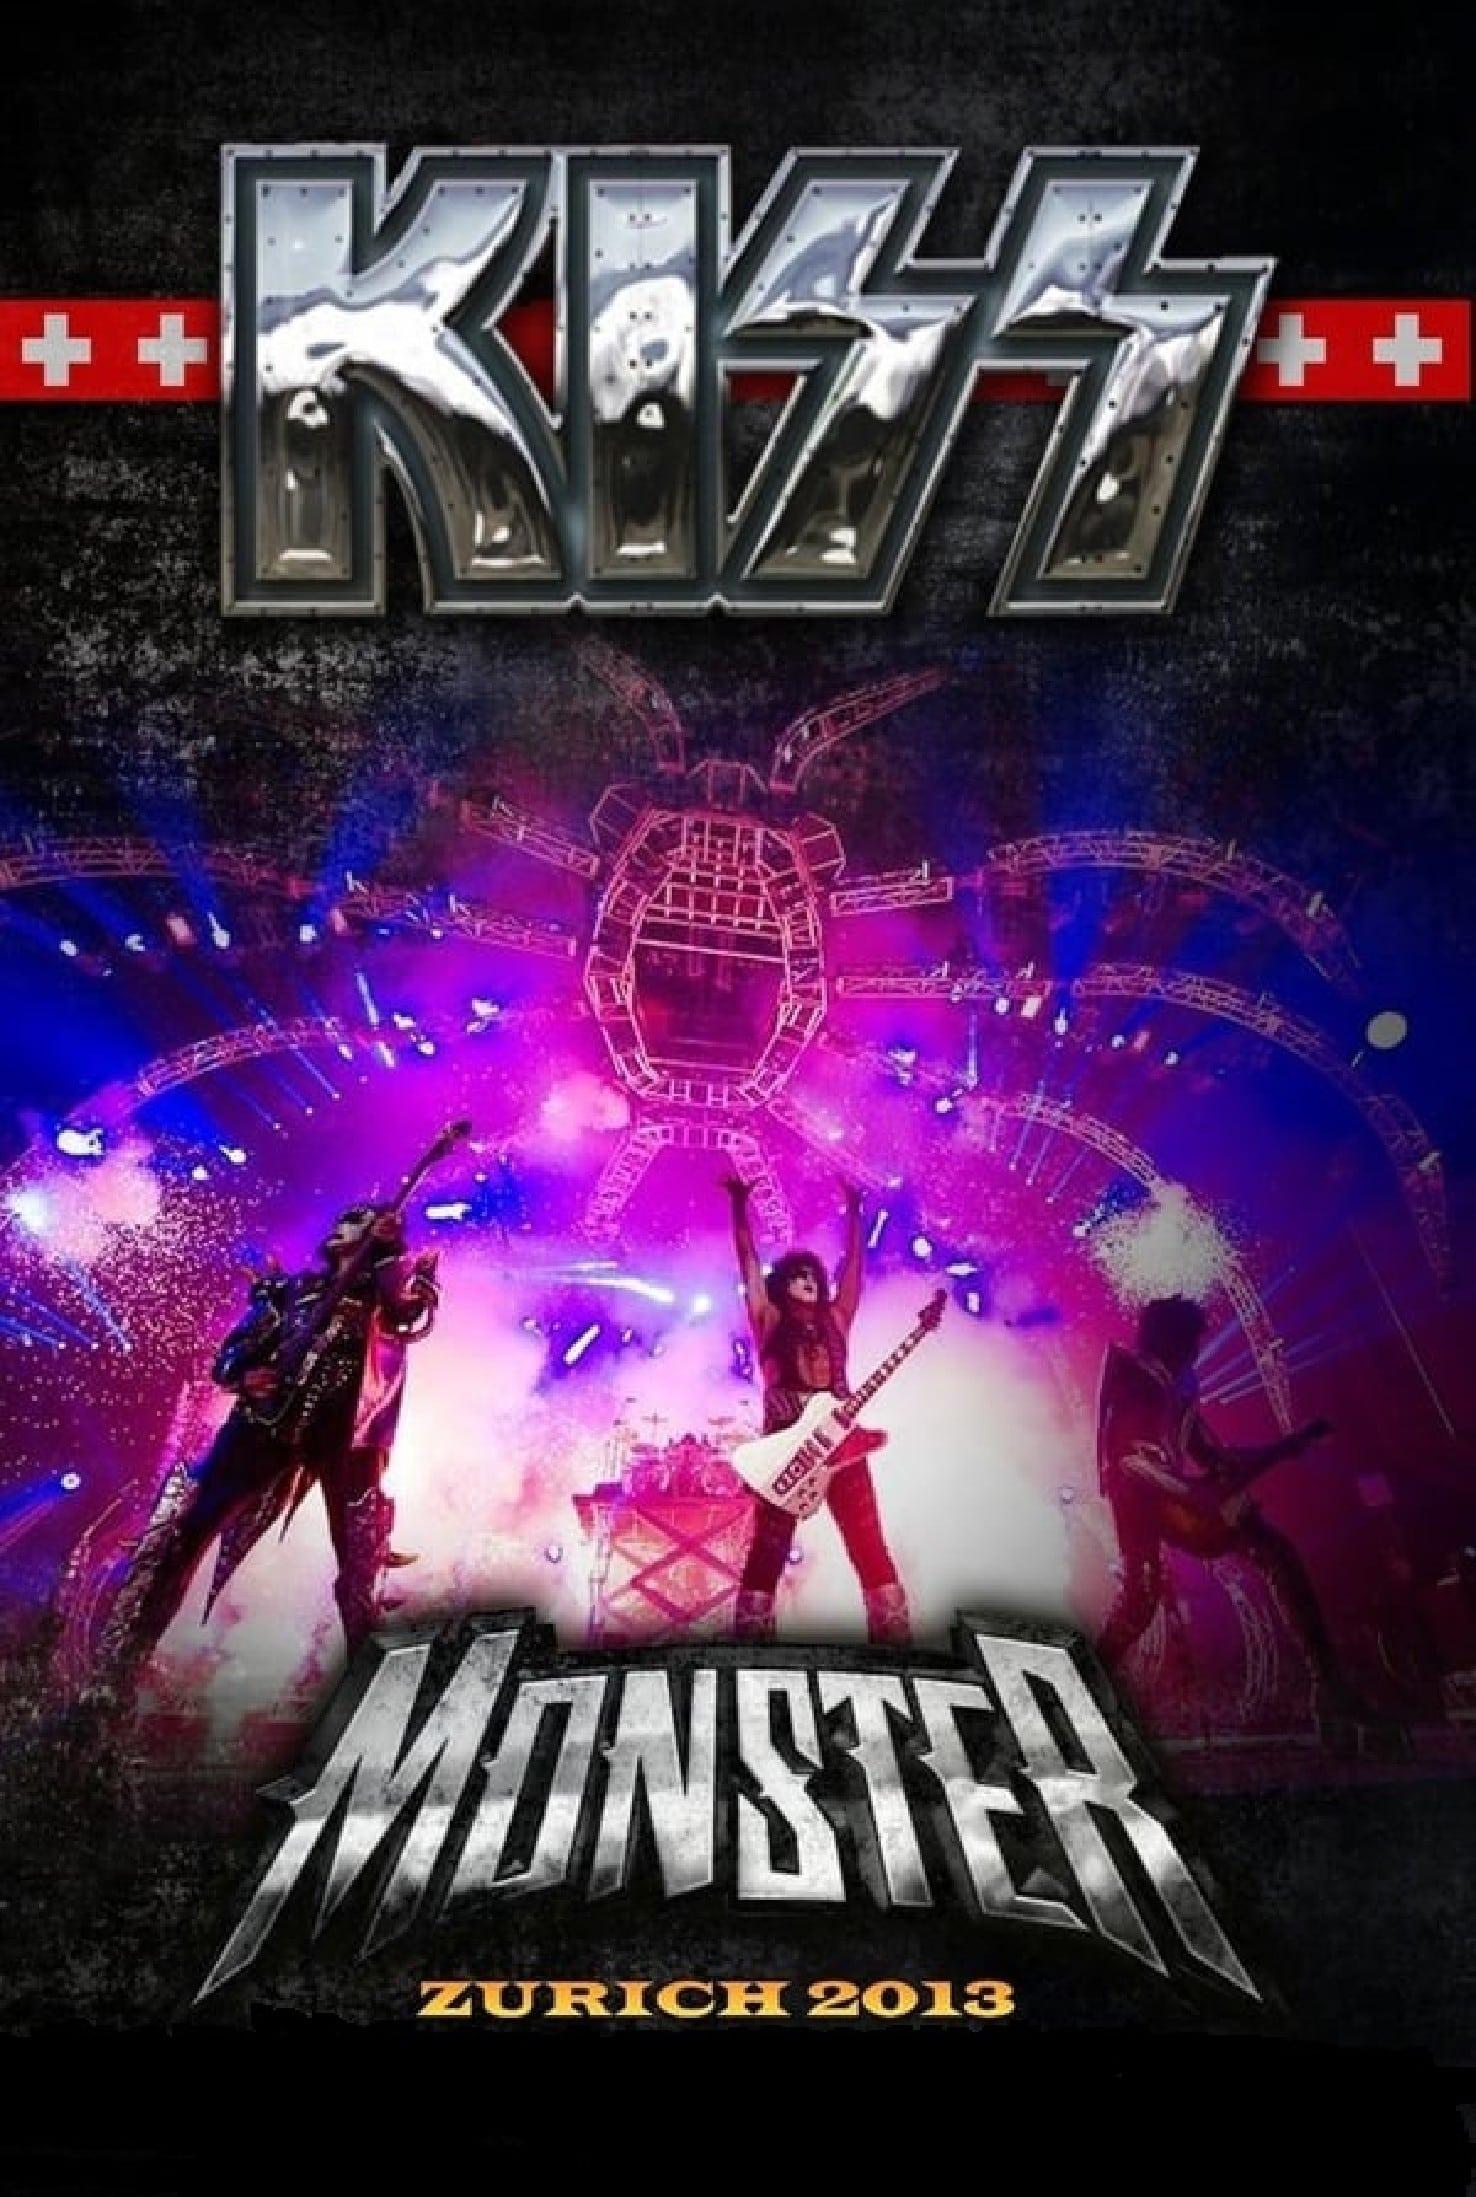 The Kiss Monster World Tour: Live from Europe poster